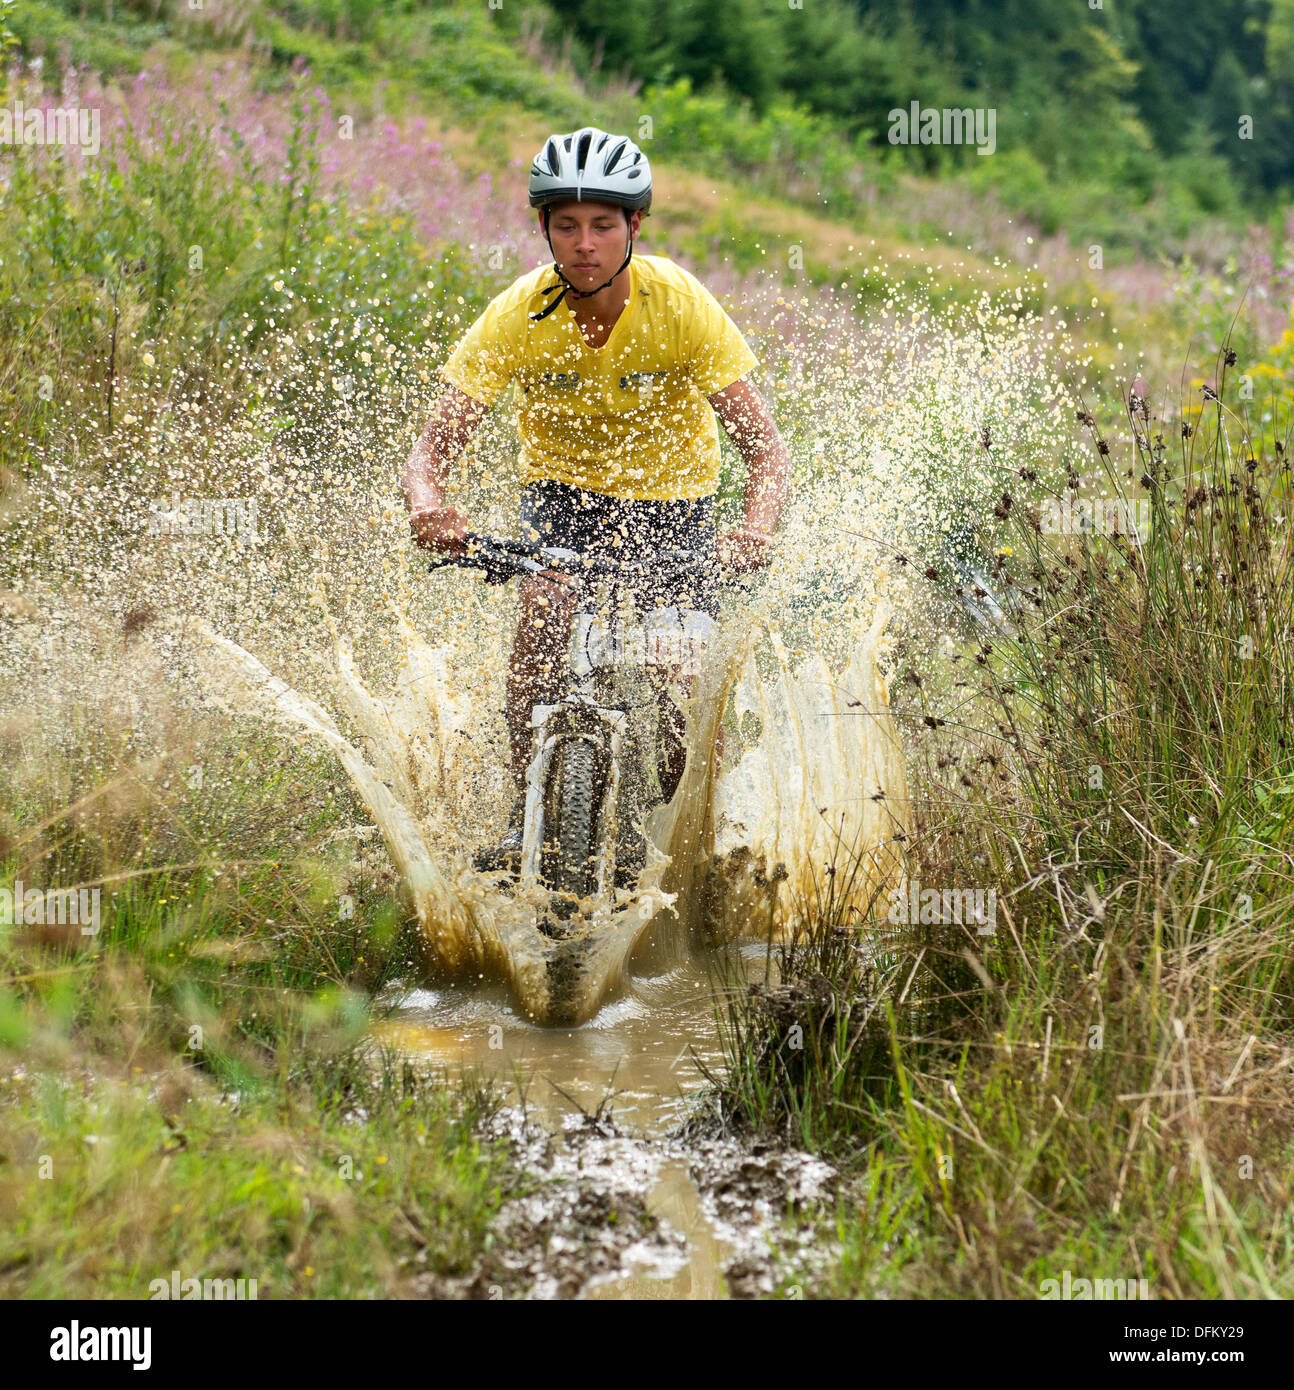 A young man on a mountain bike riding through a muddy puddle in grassy landscape Stock Photo